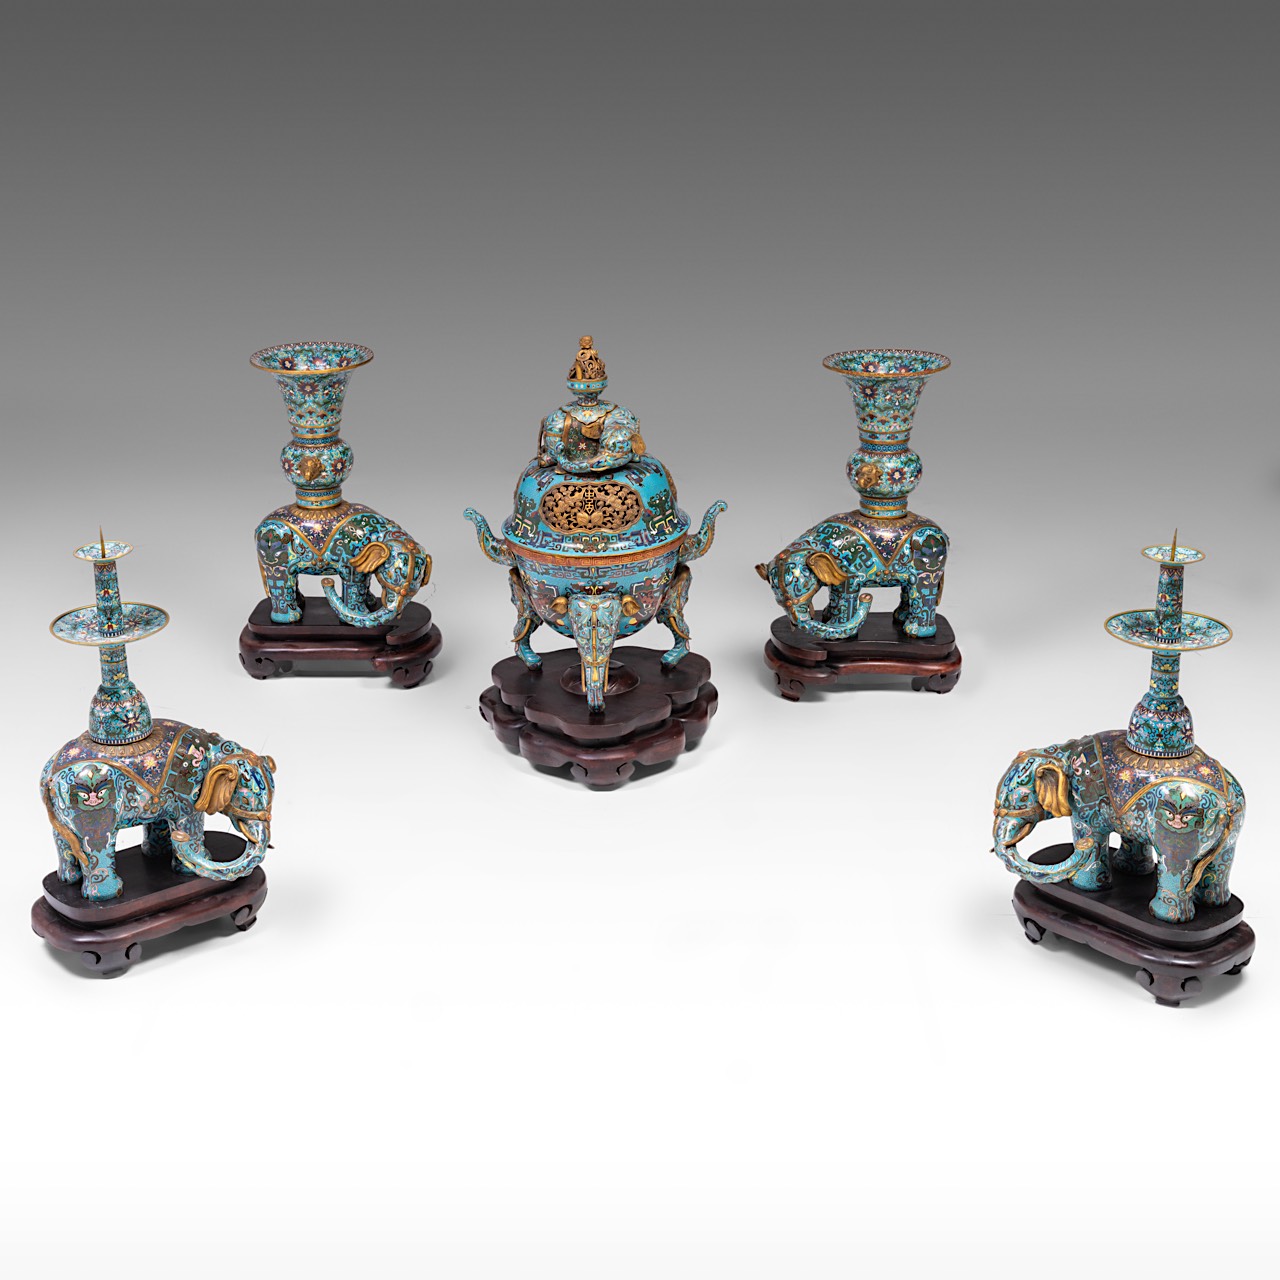 A Chinese five-piece semi-precious stone inlaid cloisonne garniture, late Qing/20thC, tallest H 58 - - Image 2 of 24